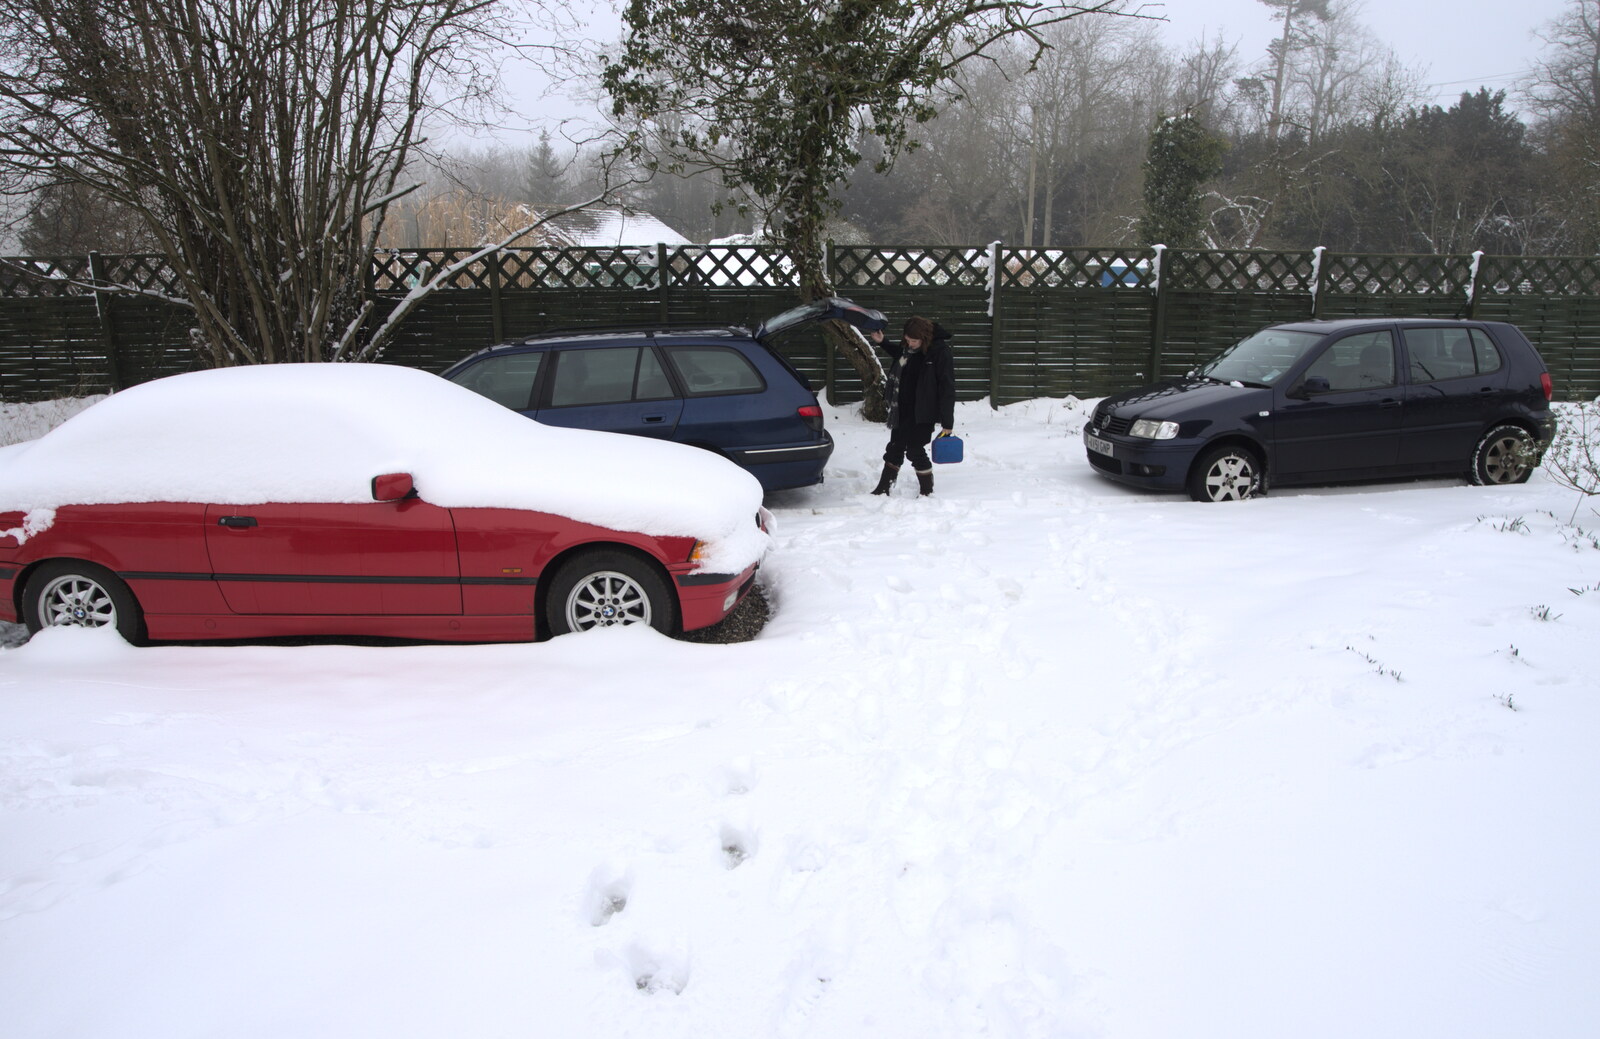 The other car is a bit buried from A Snowy February Miscellany, Suffolk - 7th February 2012